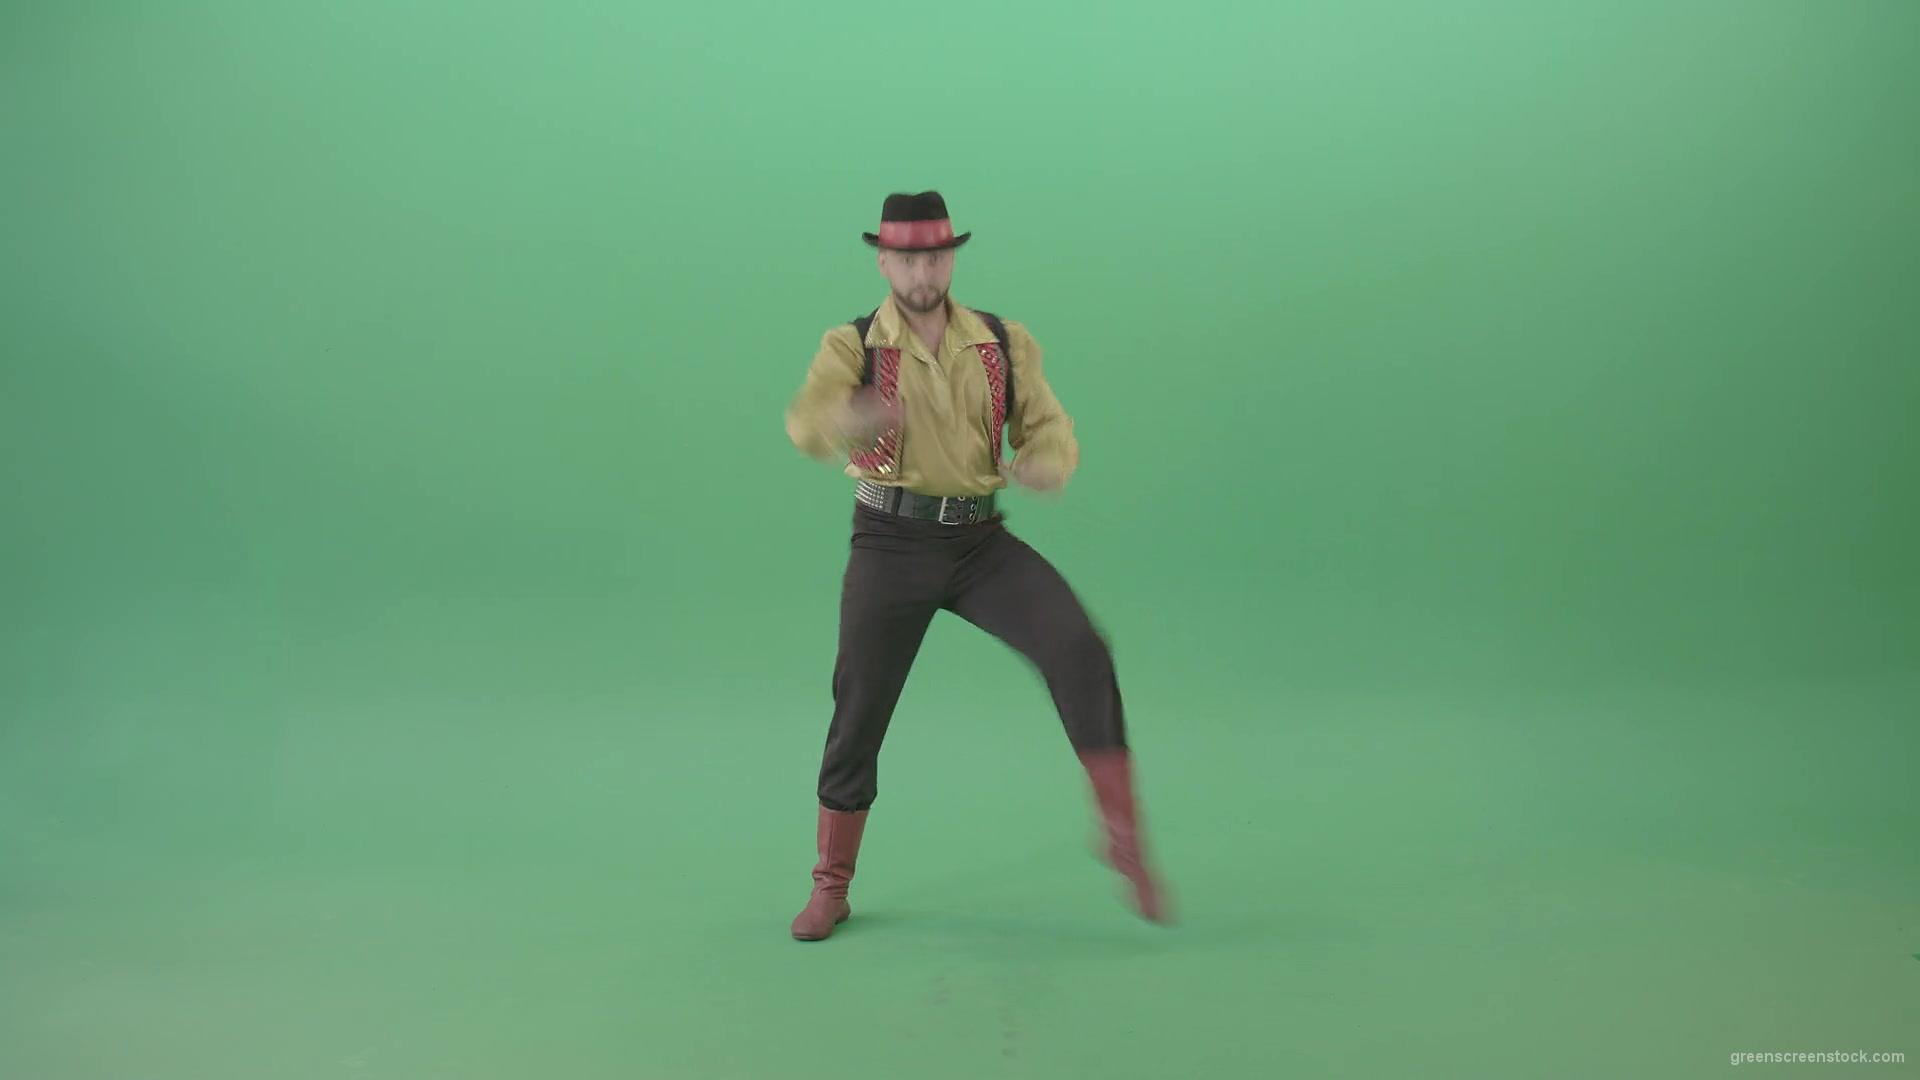 Moldova-man-dancing-with-clapping-isolated-on-Green-Screen-4K-Video-Footage-1920_005 Green Screen Stock